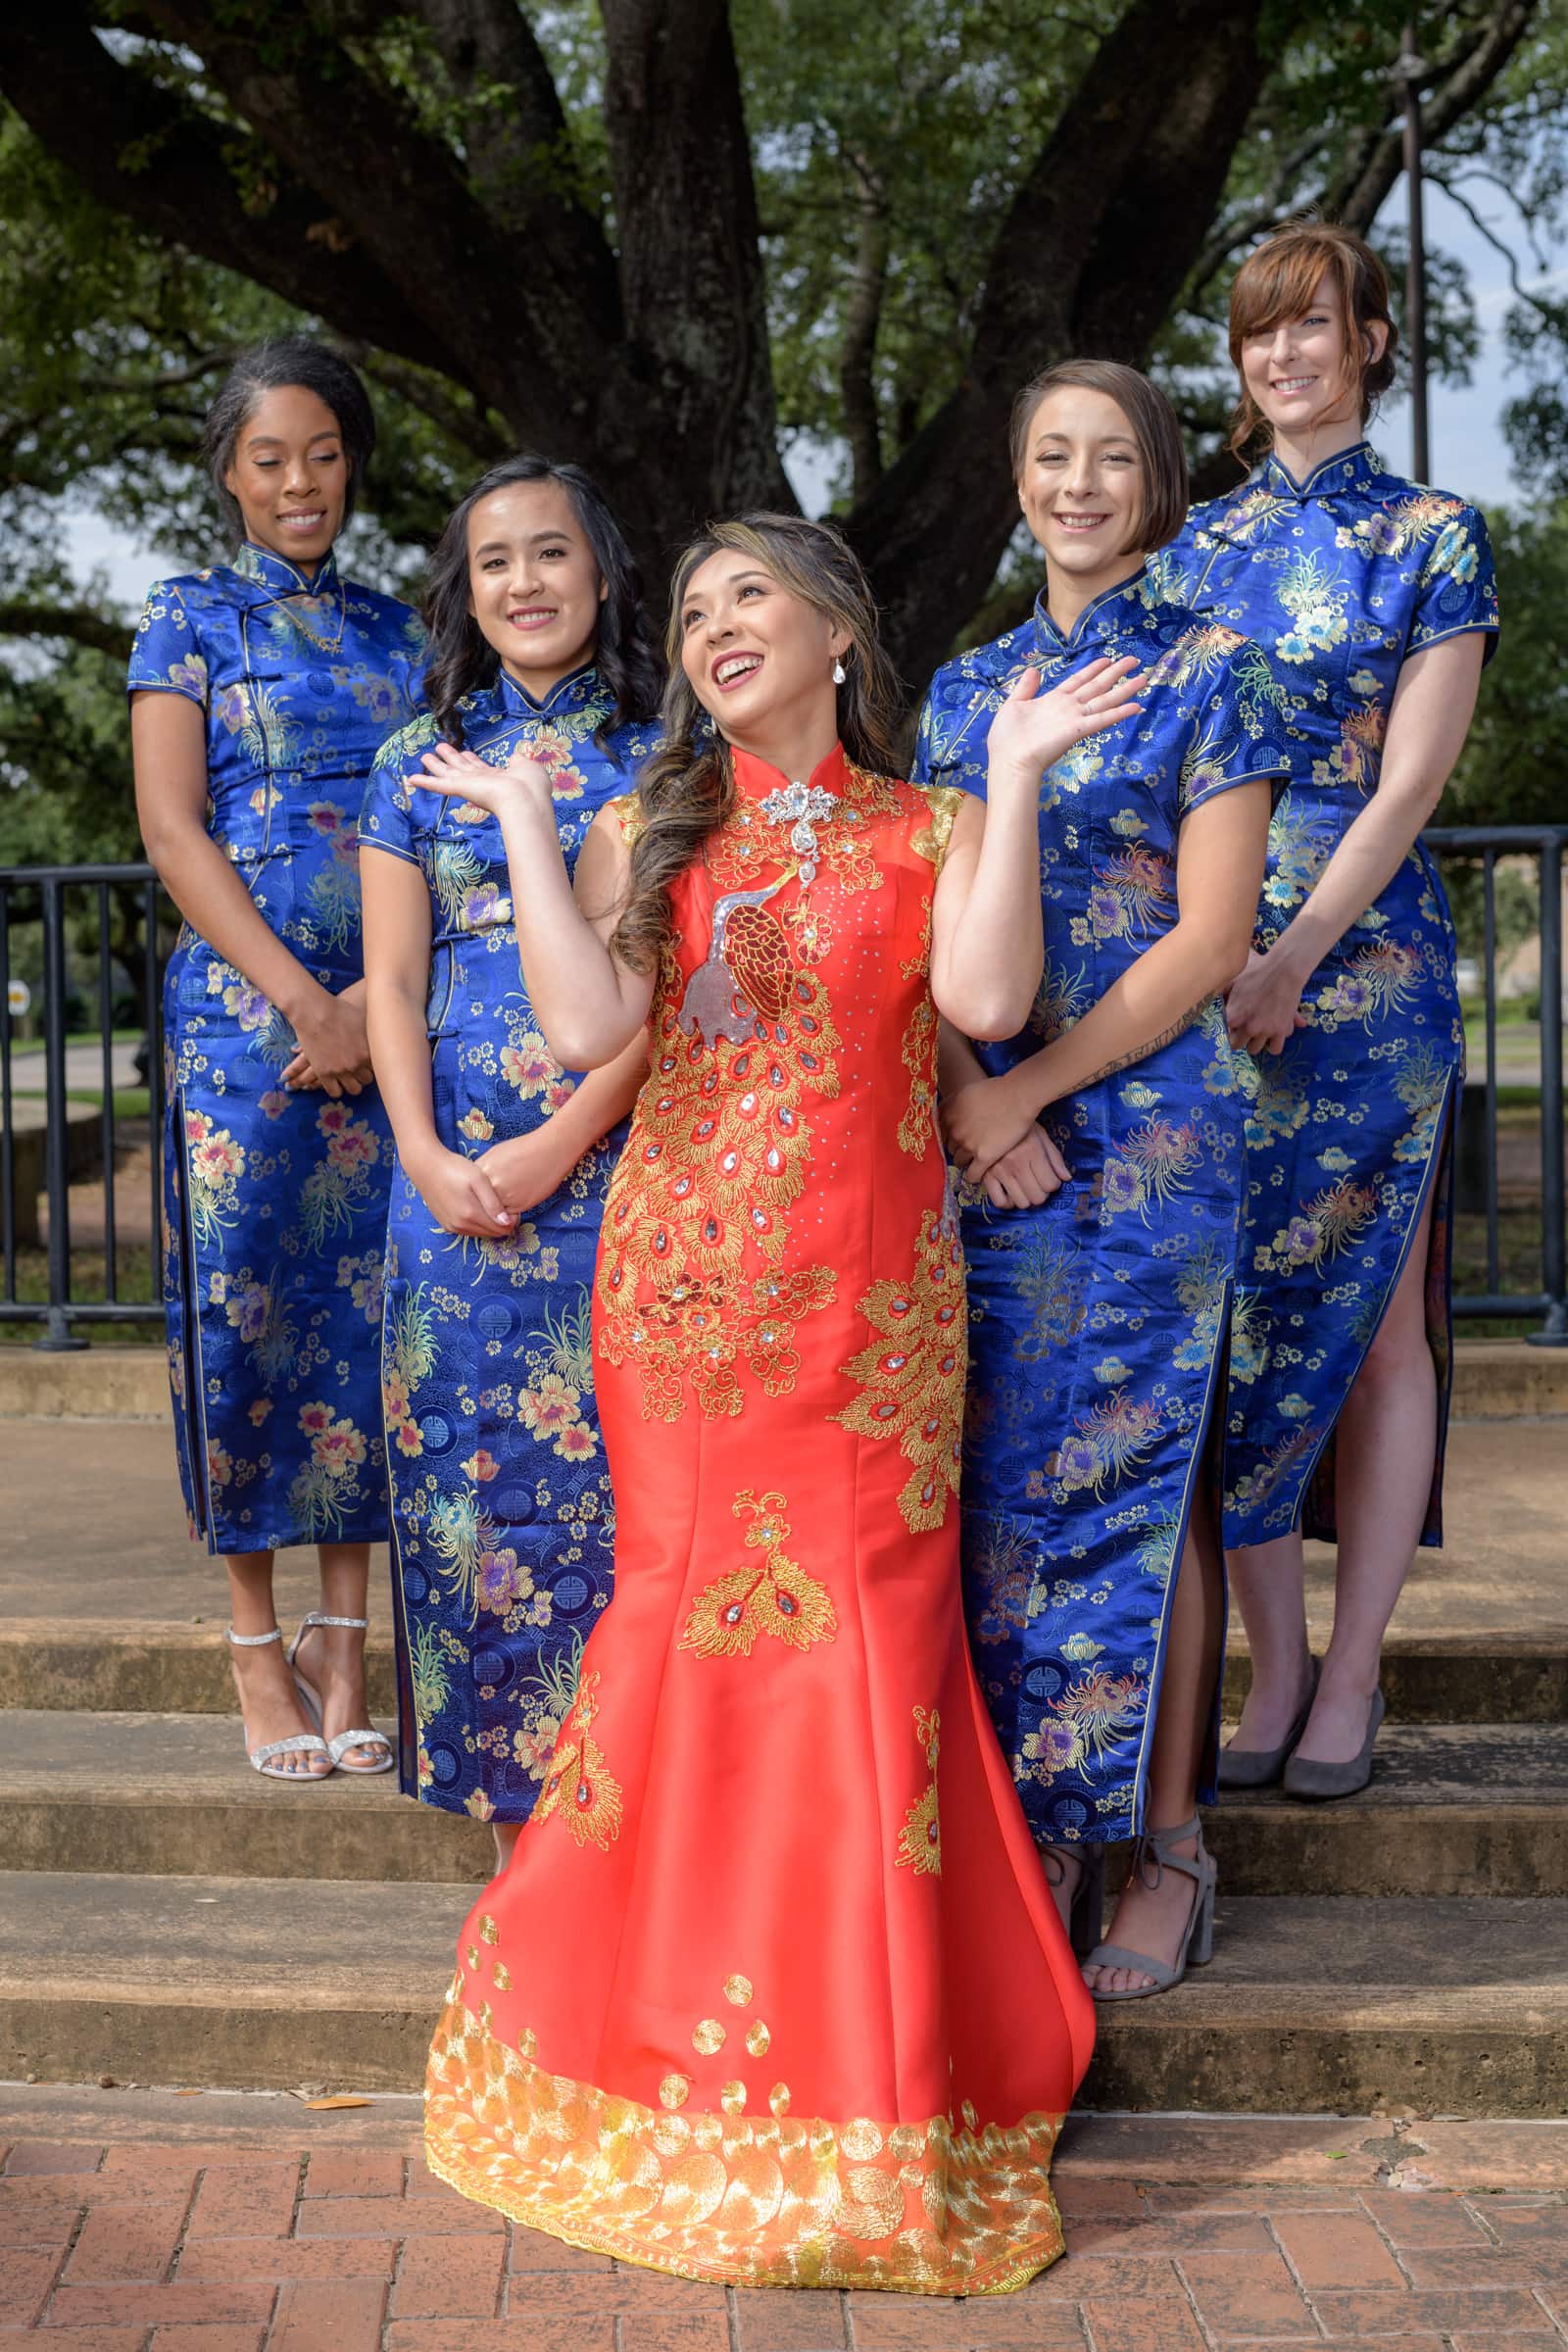  In this vibrant and colorful photograph taken by Chris Spicks Photography, known for their exceptional Houston wedding photographer services, we are presented with a beautiful moment that blends cultural tradition with the joy of a wedding celebration.  The image features a bride at the center, radiant in a traditional red gown adorned with intricate golden embroidery, which symbolizes good luck and happiness in many Eastern cultures. Her attire is stunning, with a high collar and fitted bodice that flows into a full skirt, culminating in a golden hem. The bride's hair is styled elegantly, and she wears a smile that lights up the frame, expressing her excitement and joy on this special day.  Flanking the bride are her bridesmaids, each dressed in harmonious blue cheongsam dresses with floral patterns, their smiles reflecting the festive spirit. The unity in their attire creates a beautiful contrast against the bride’s red gown, adding depth and richness to the visual composition.  The backdrop of a large, lush tree and the clear skies above, as captured in this outdoor setting, adds a natural serenity to the scene. The light cascades softly over the bridal party, illuminating them with a gentle glow that highlights the colors and textures of their exquisite garments.  This photograph is a testament to the skill and artistry of Chris Spicks Photography, showcasing their ability to capture not just the visual splendor of a wedding but the cultural essence and personal happiness of the bride and her close companions. It’s an image that tells a story of tradition, friendship, and the start of a new chapter, all within the heart of Houston.